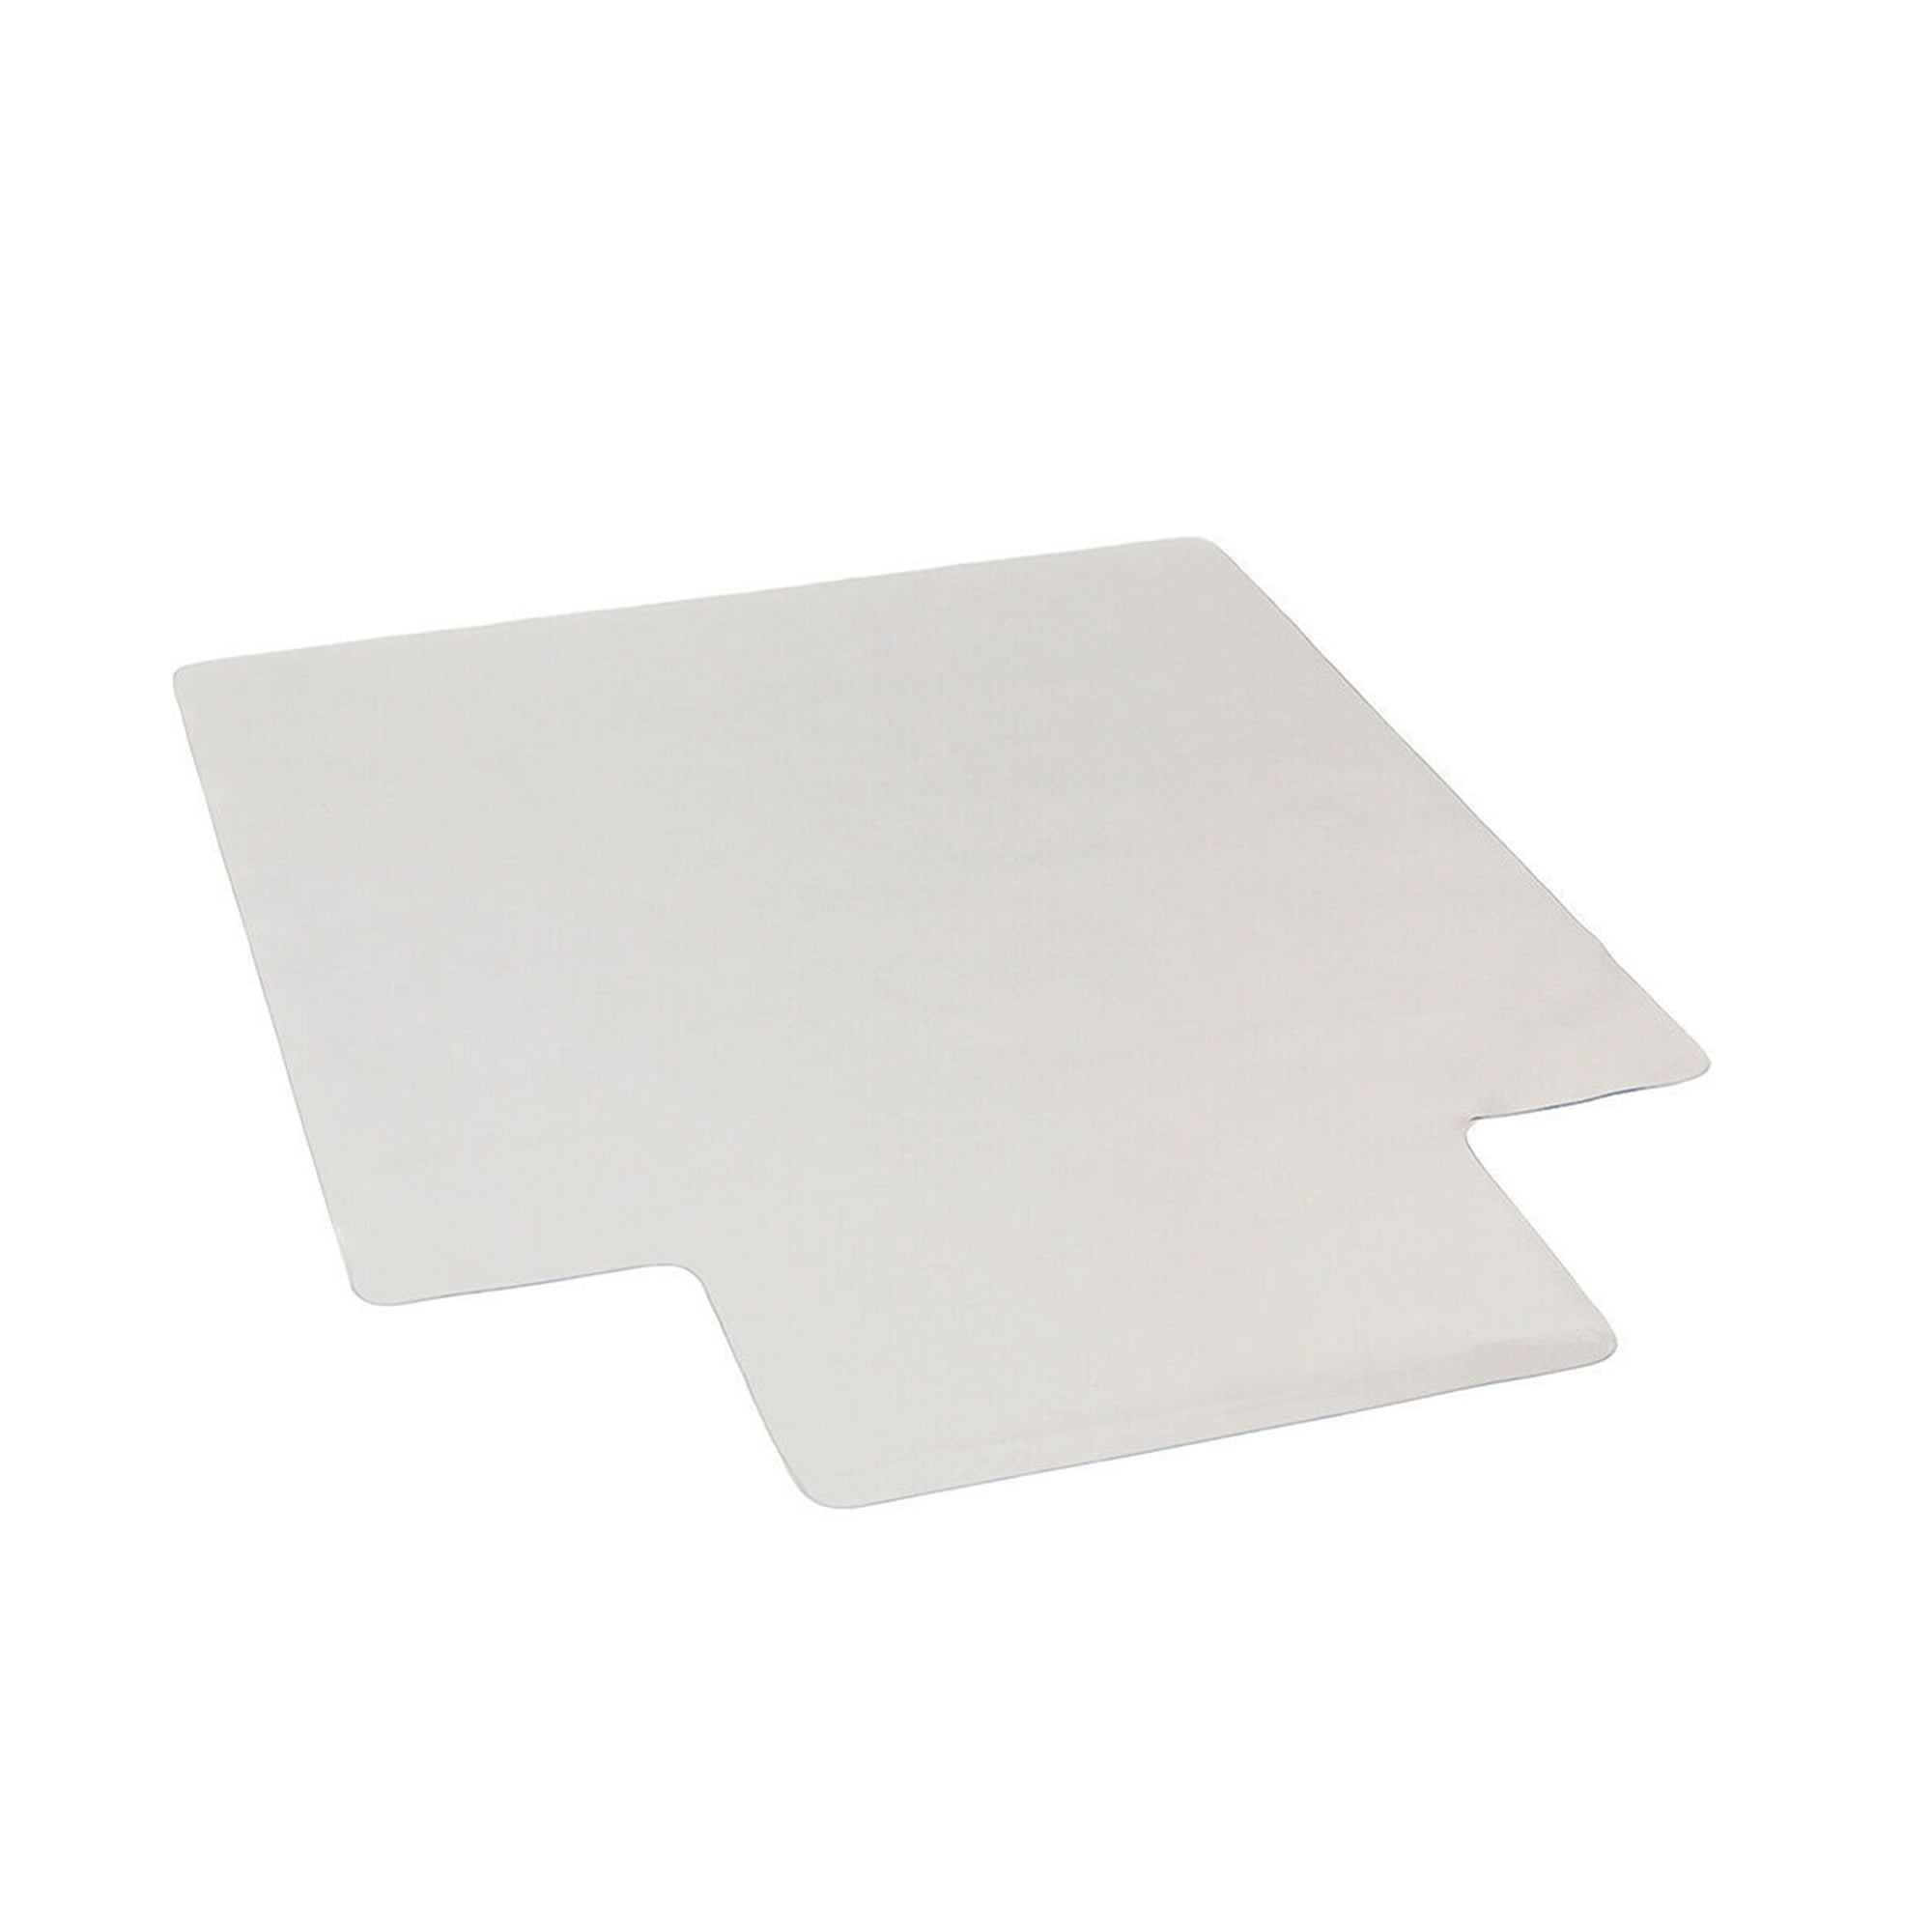 Realspace Hard Chair Mat For Hard Surfaces, Wide Lip, 45